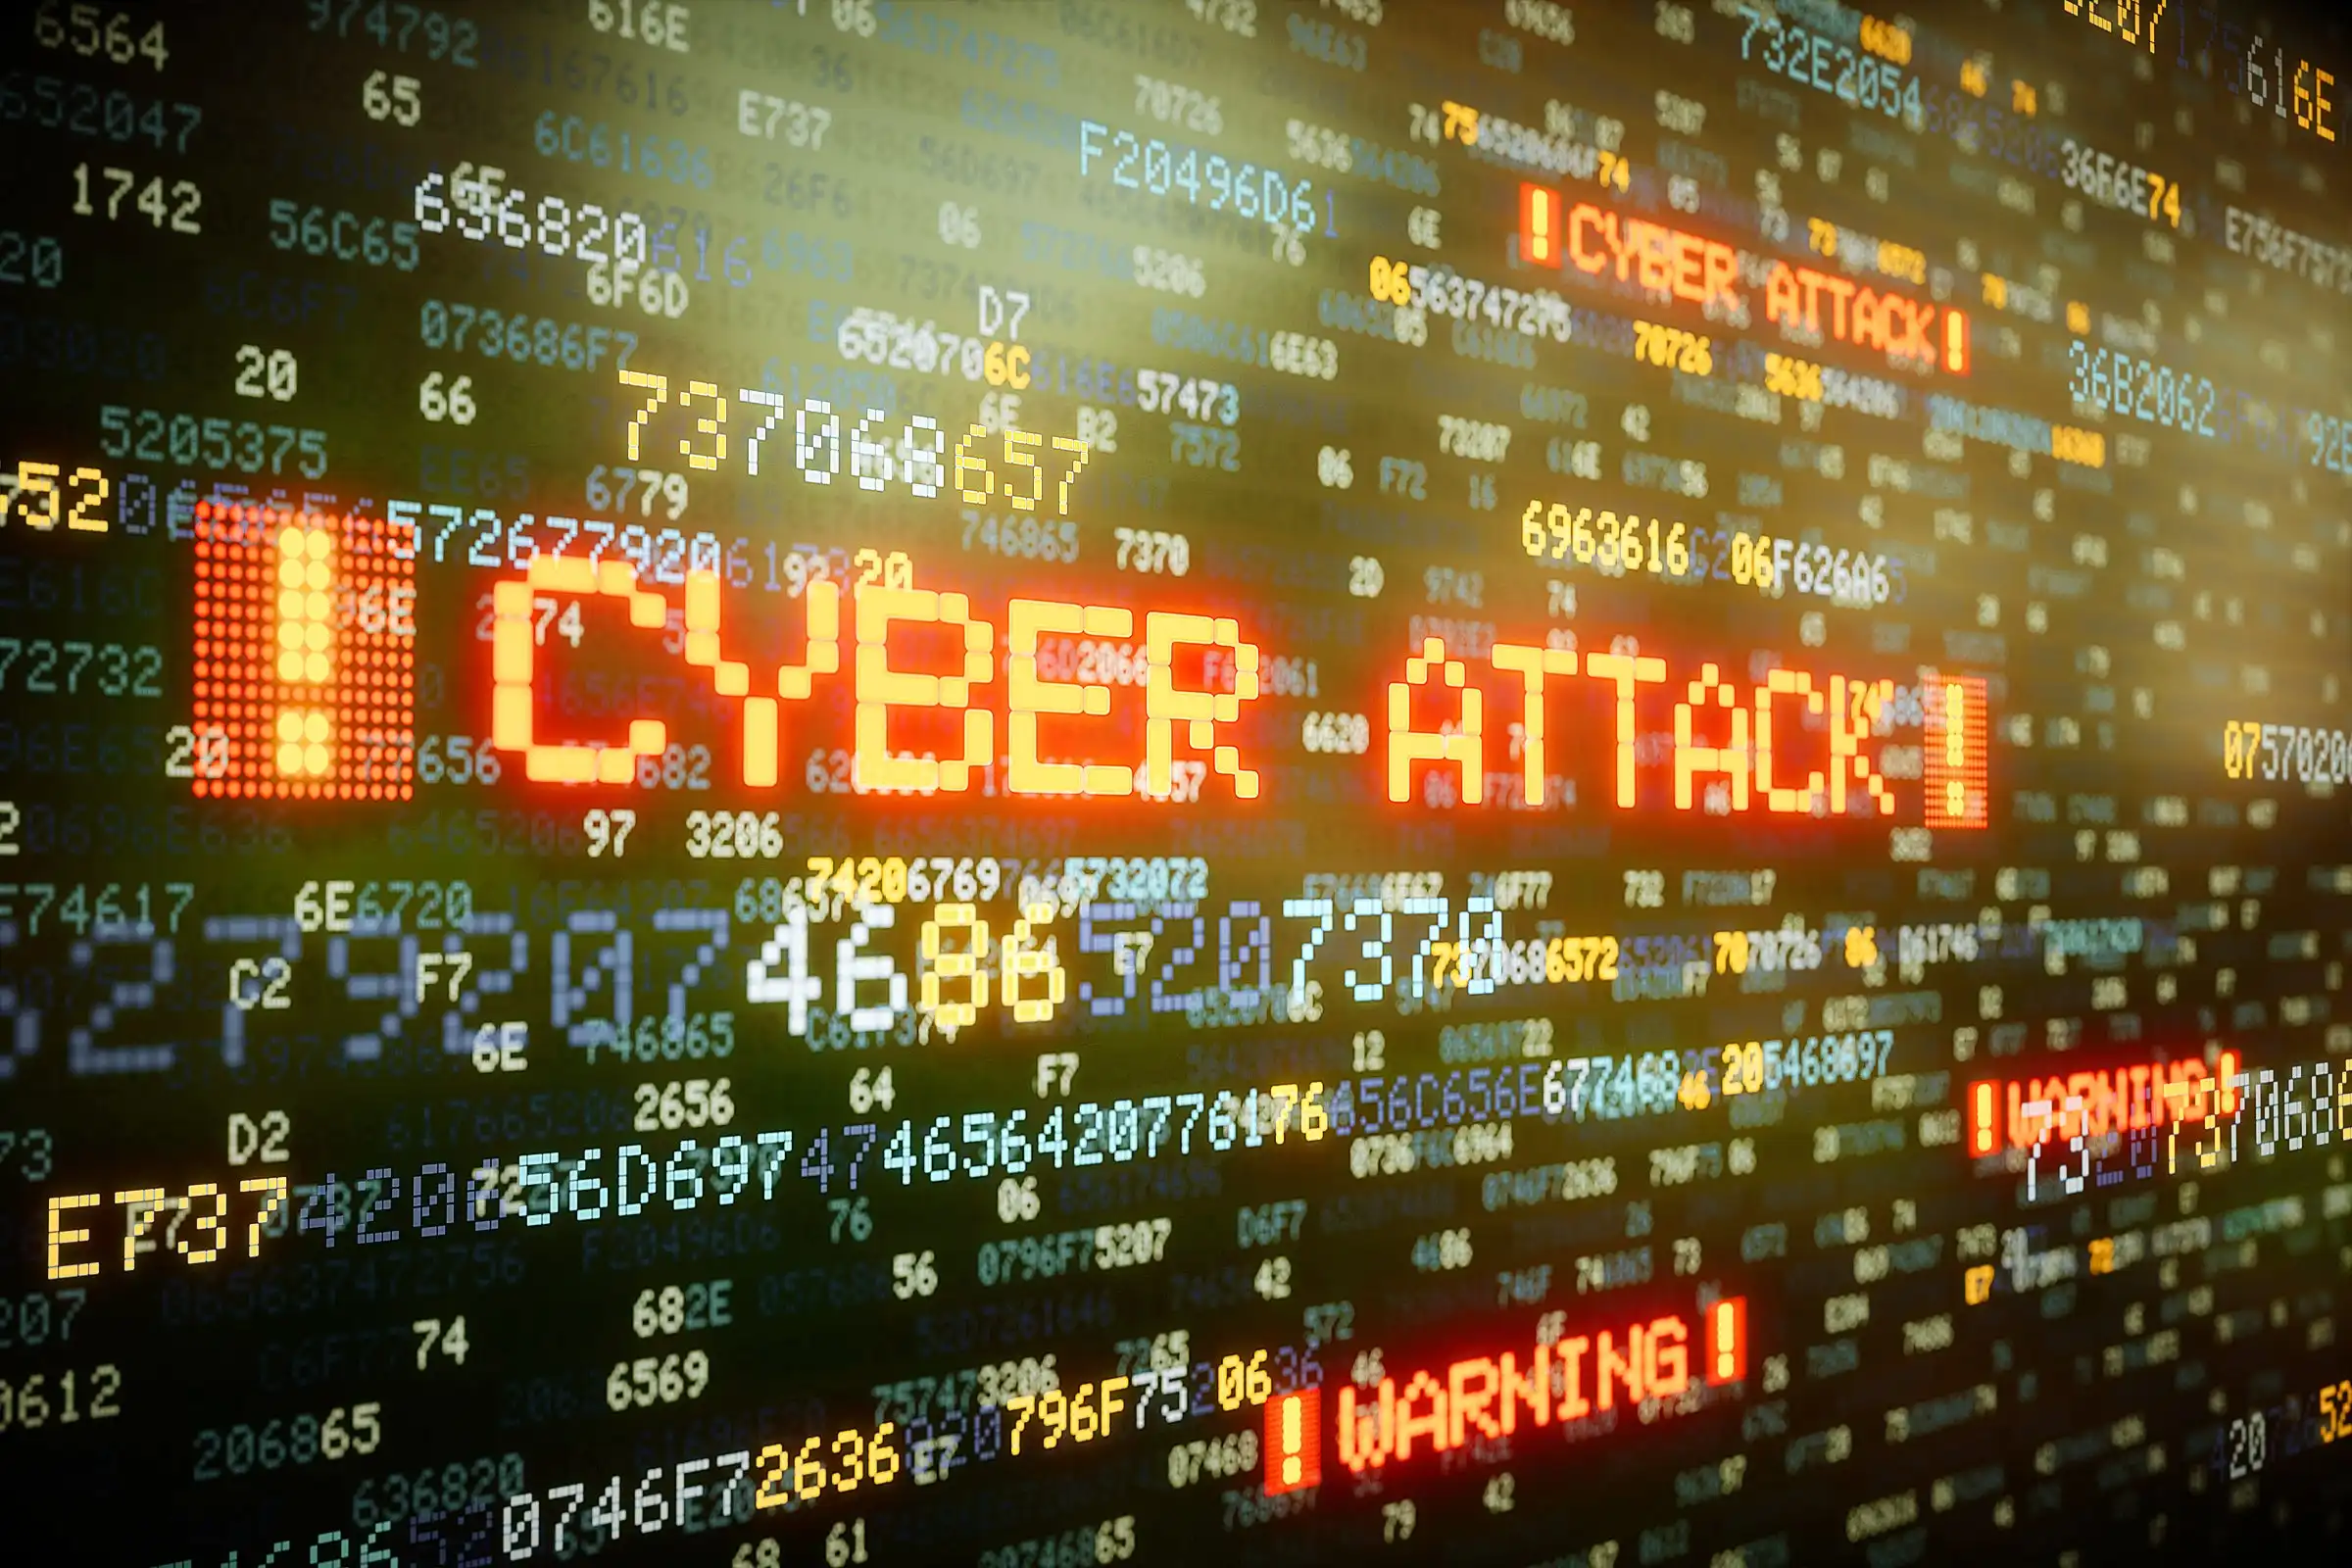 British Spy Agency Cautions Against Surge in Cyberattacks Due to Rapid AI Development